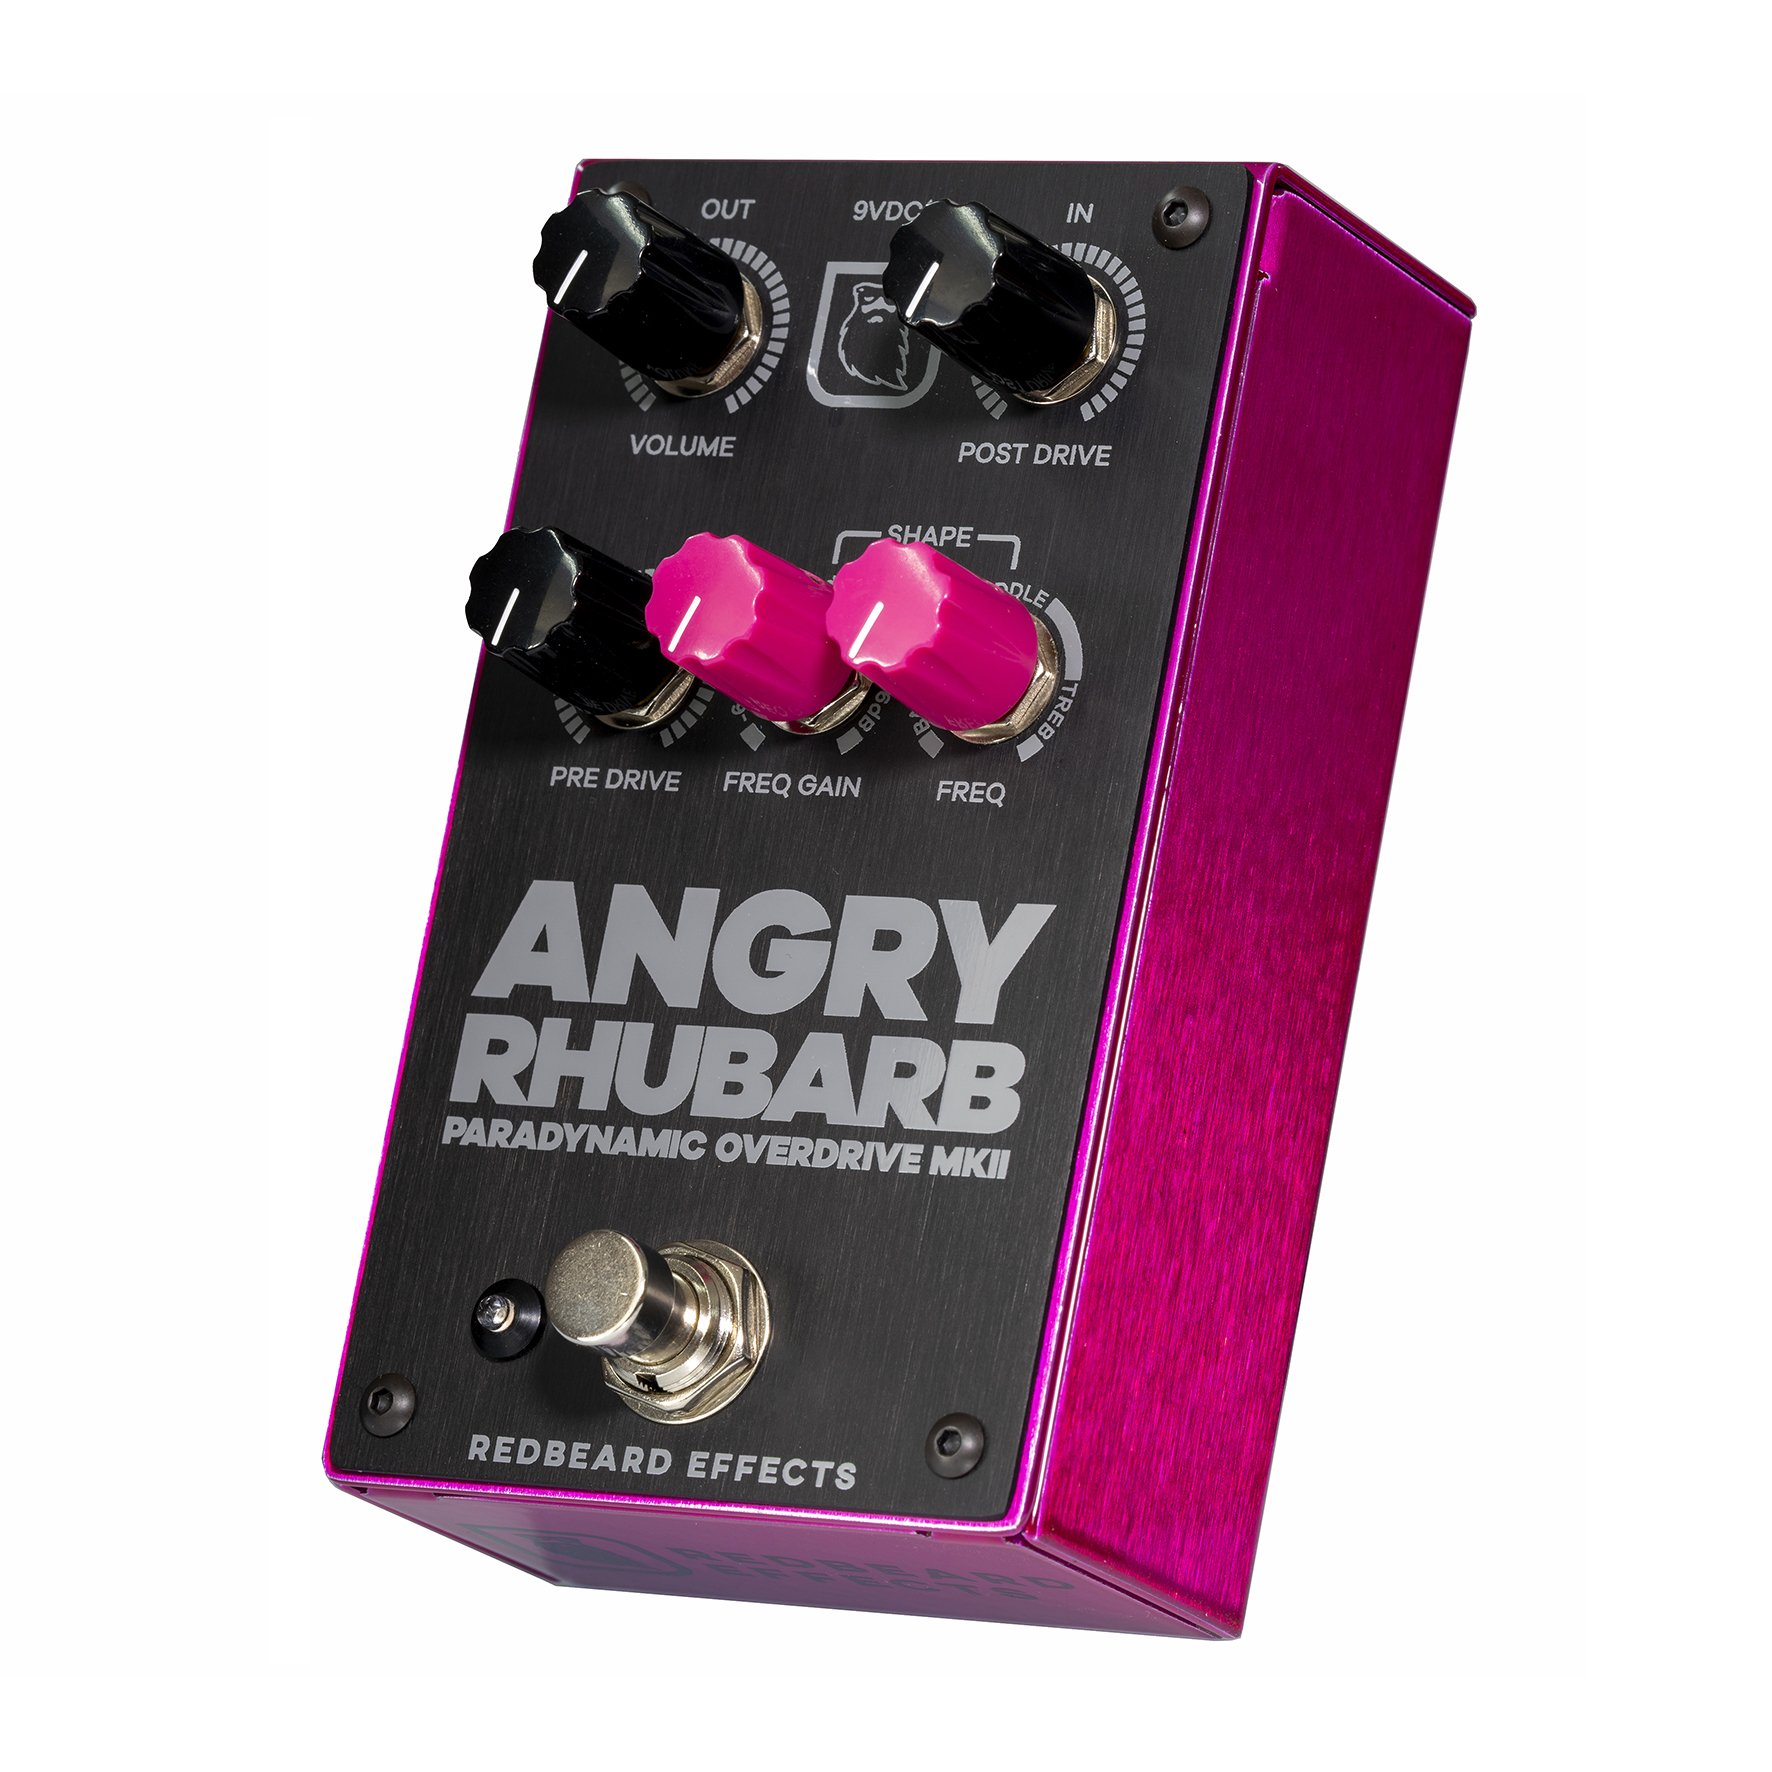 Redbeard Effects Angry Rhubarb Paradynamic Overdrive Mkii - Overdrive, distortion & fuzz effect pedal - Variation 1